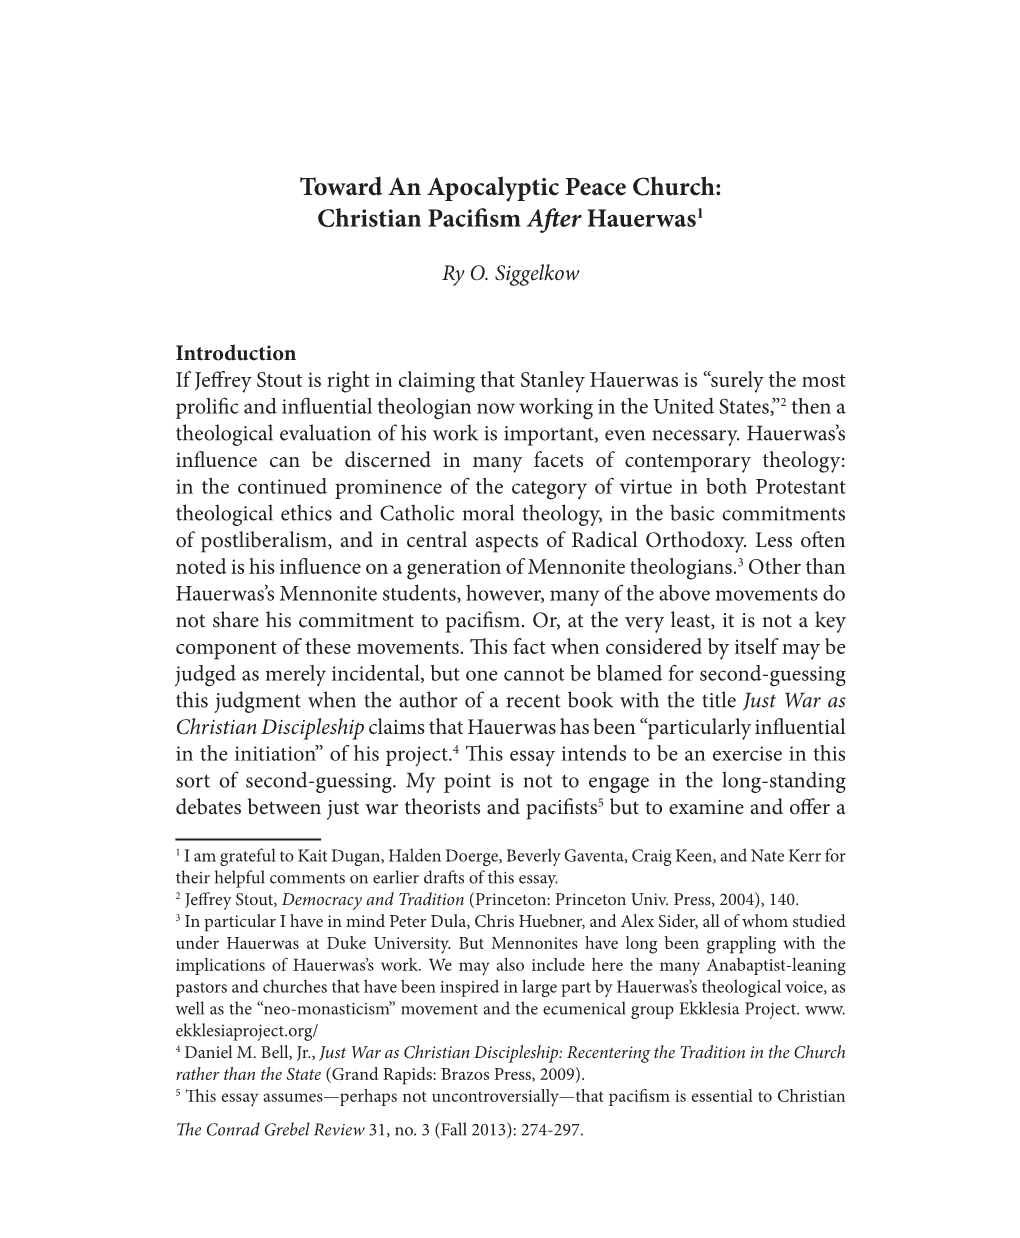 Toward an Apocalyptic Peace Church: Christian Pacifism After Hauerwas1